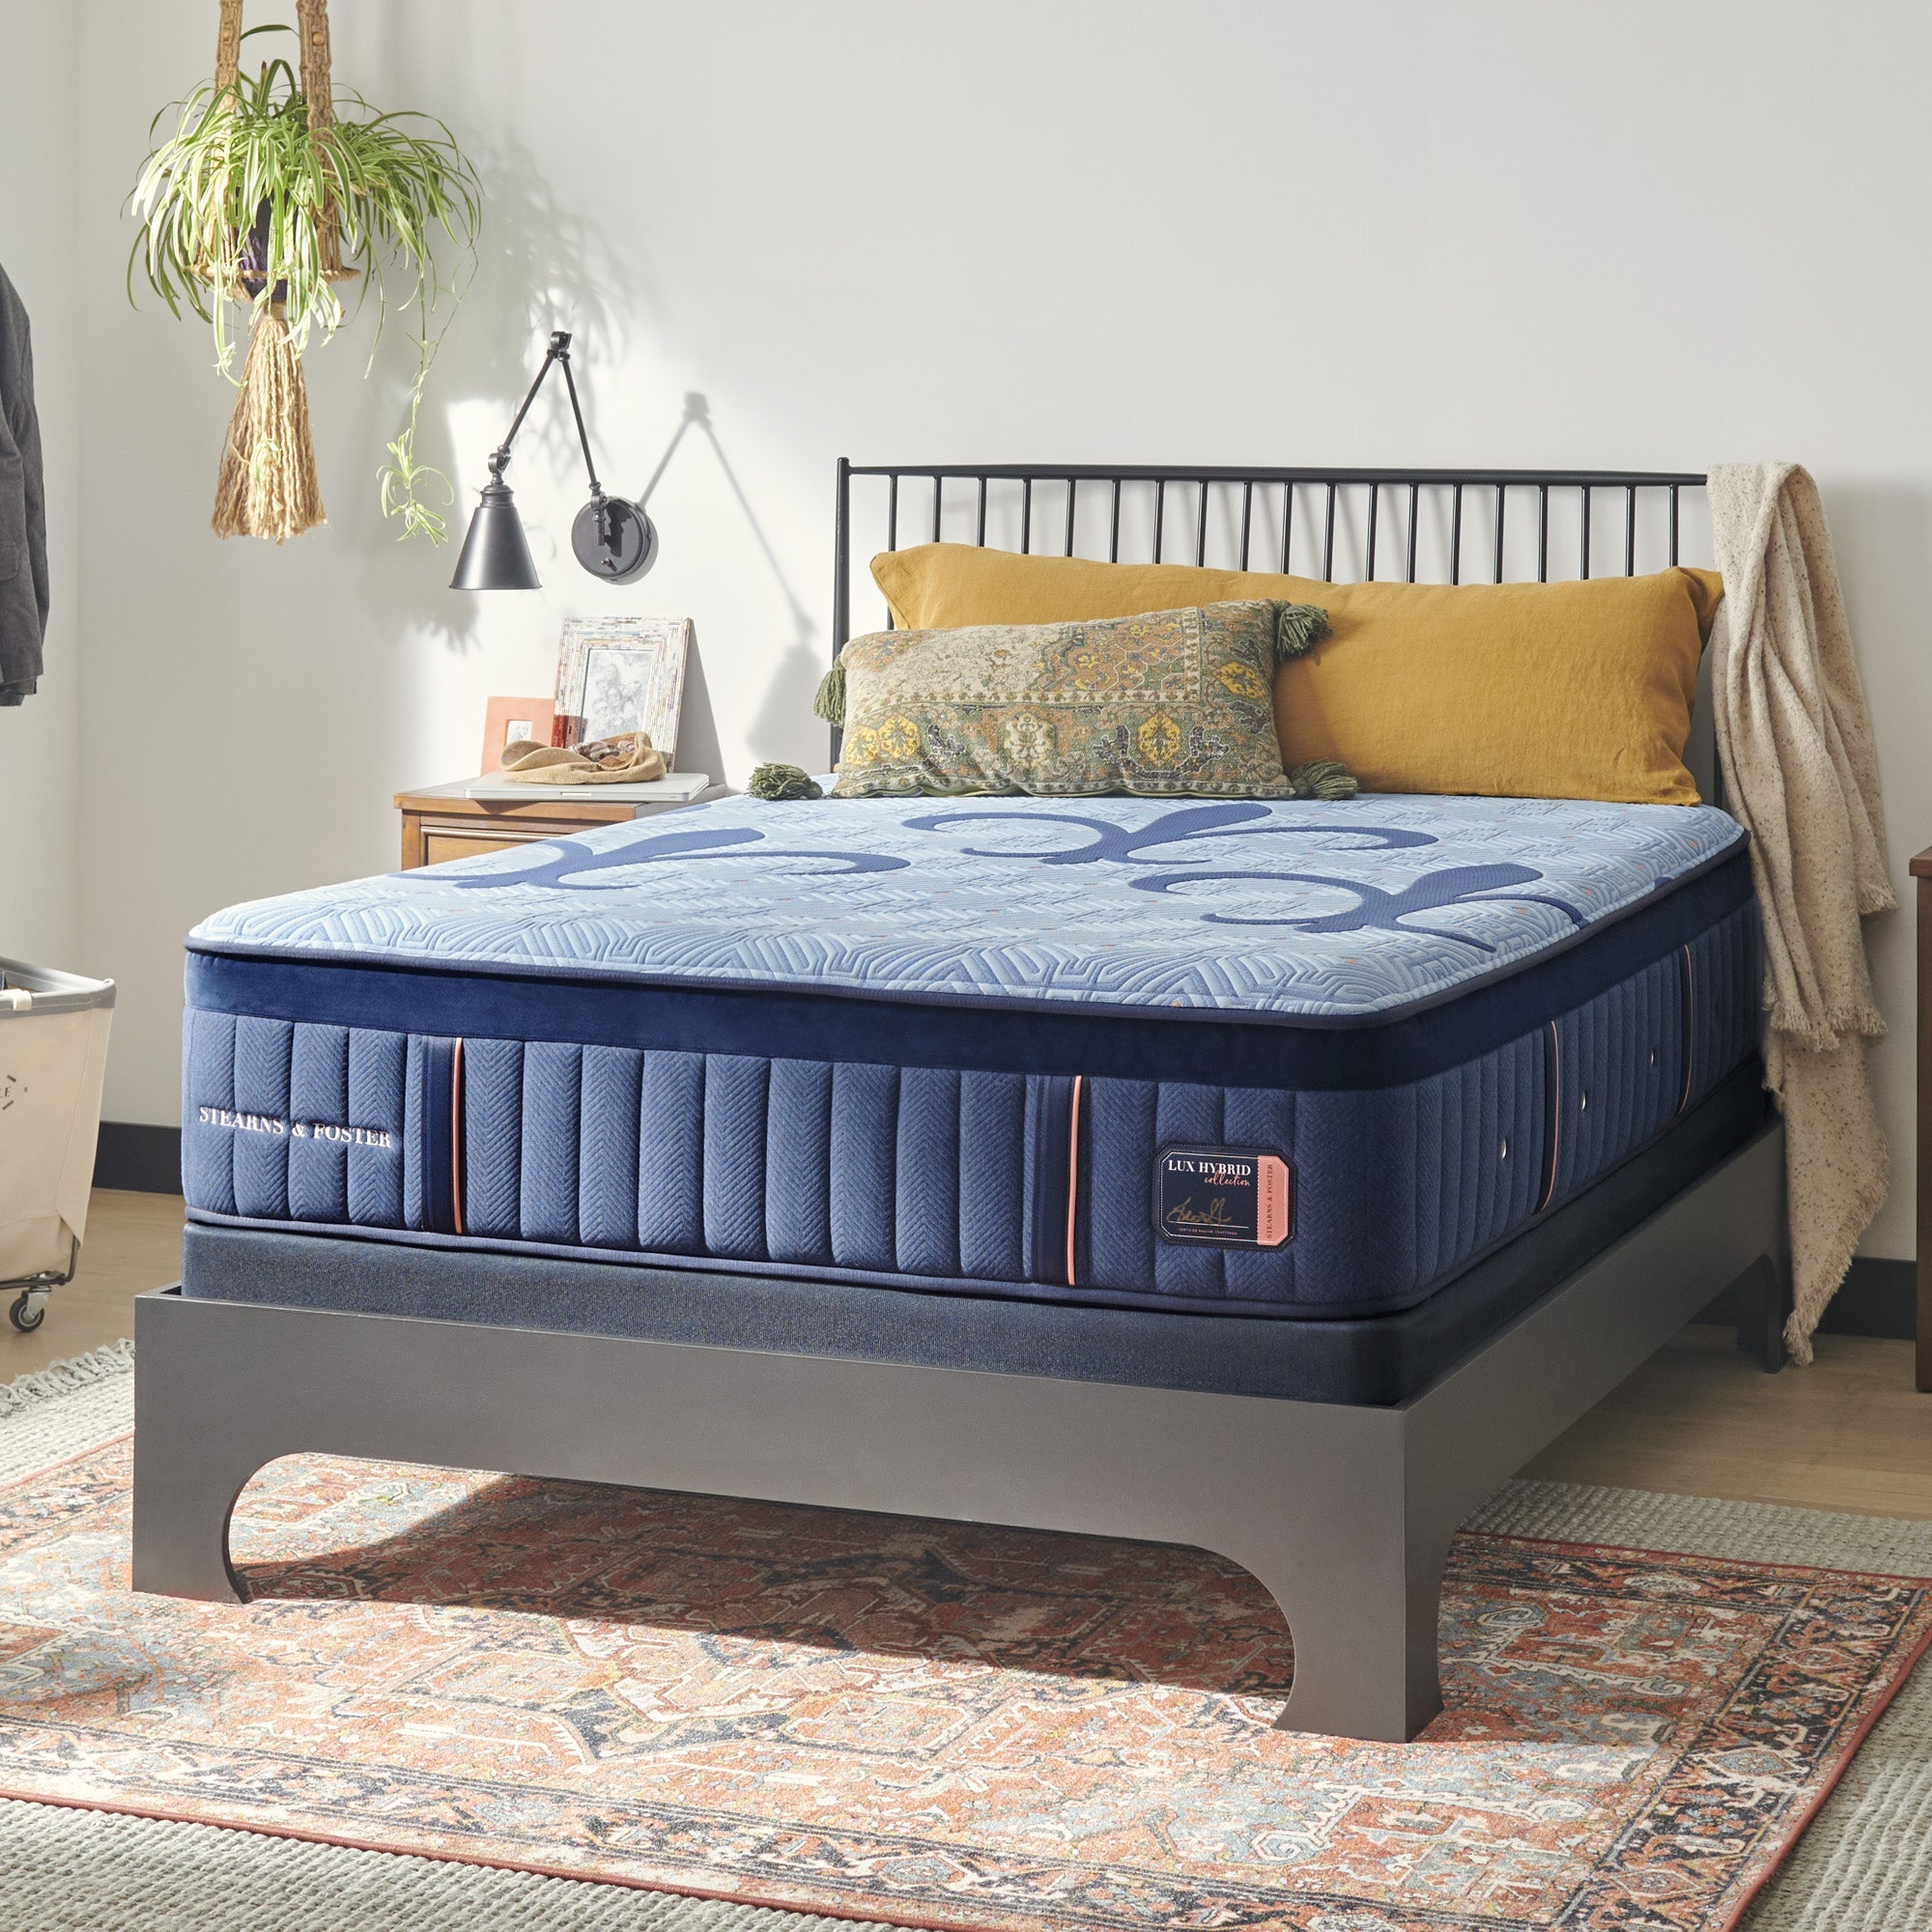 Picture of Stearns & Foster Lux Hybrid Firm Mattress